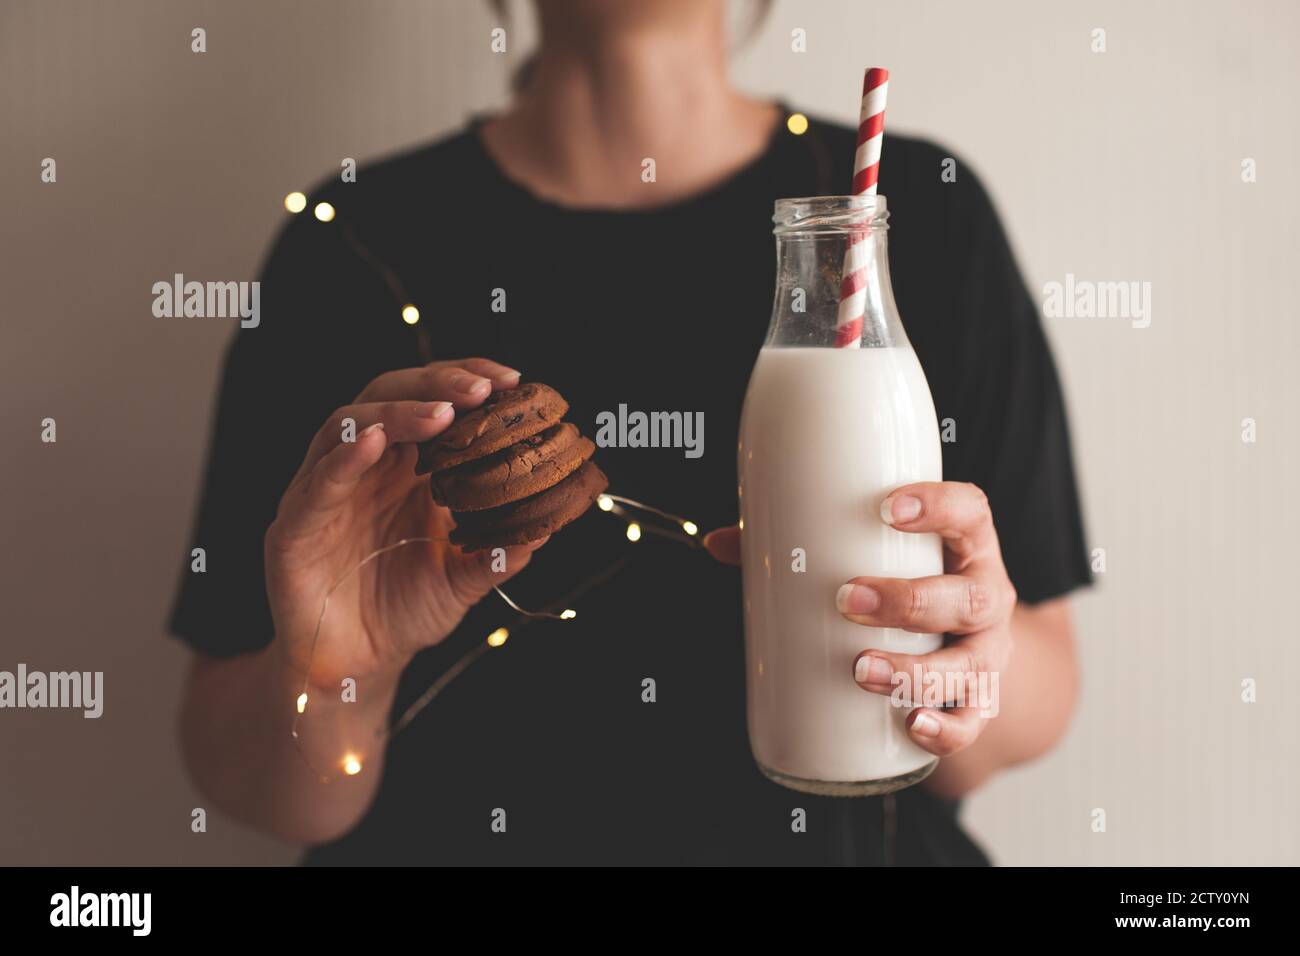 Girl holding chocolate cookies and bottle of fresh milk in room close up. Winter holiday season. Stock Photo